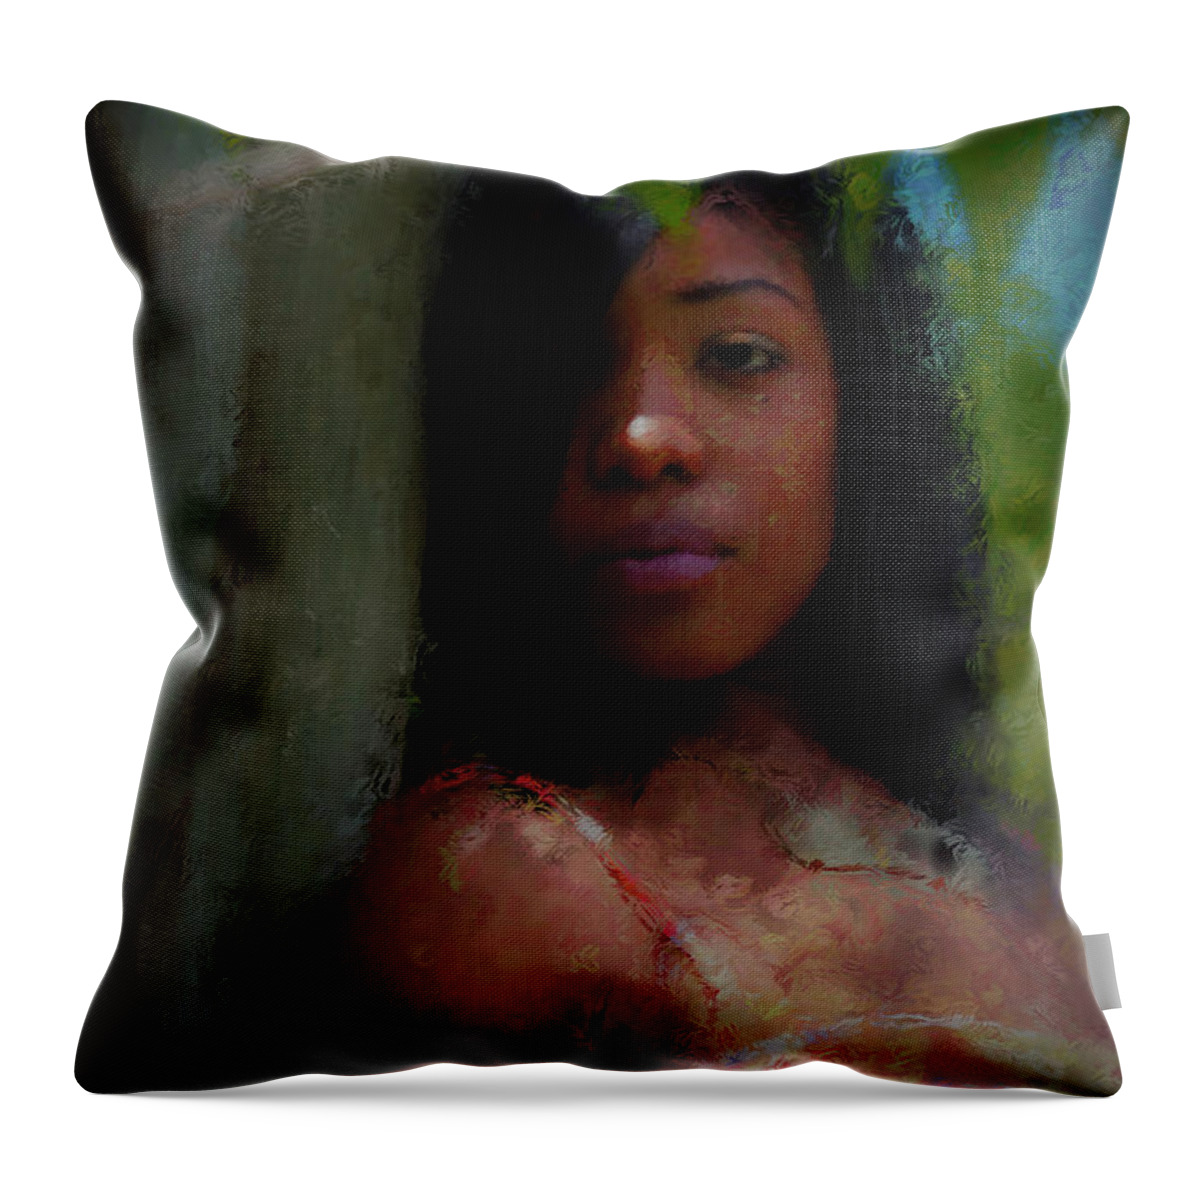 Painted Throw Pillow featuring the photograph Painted Between The Branches by JB Thomas